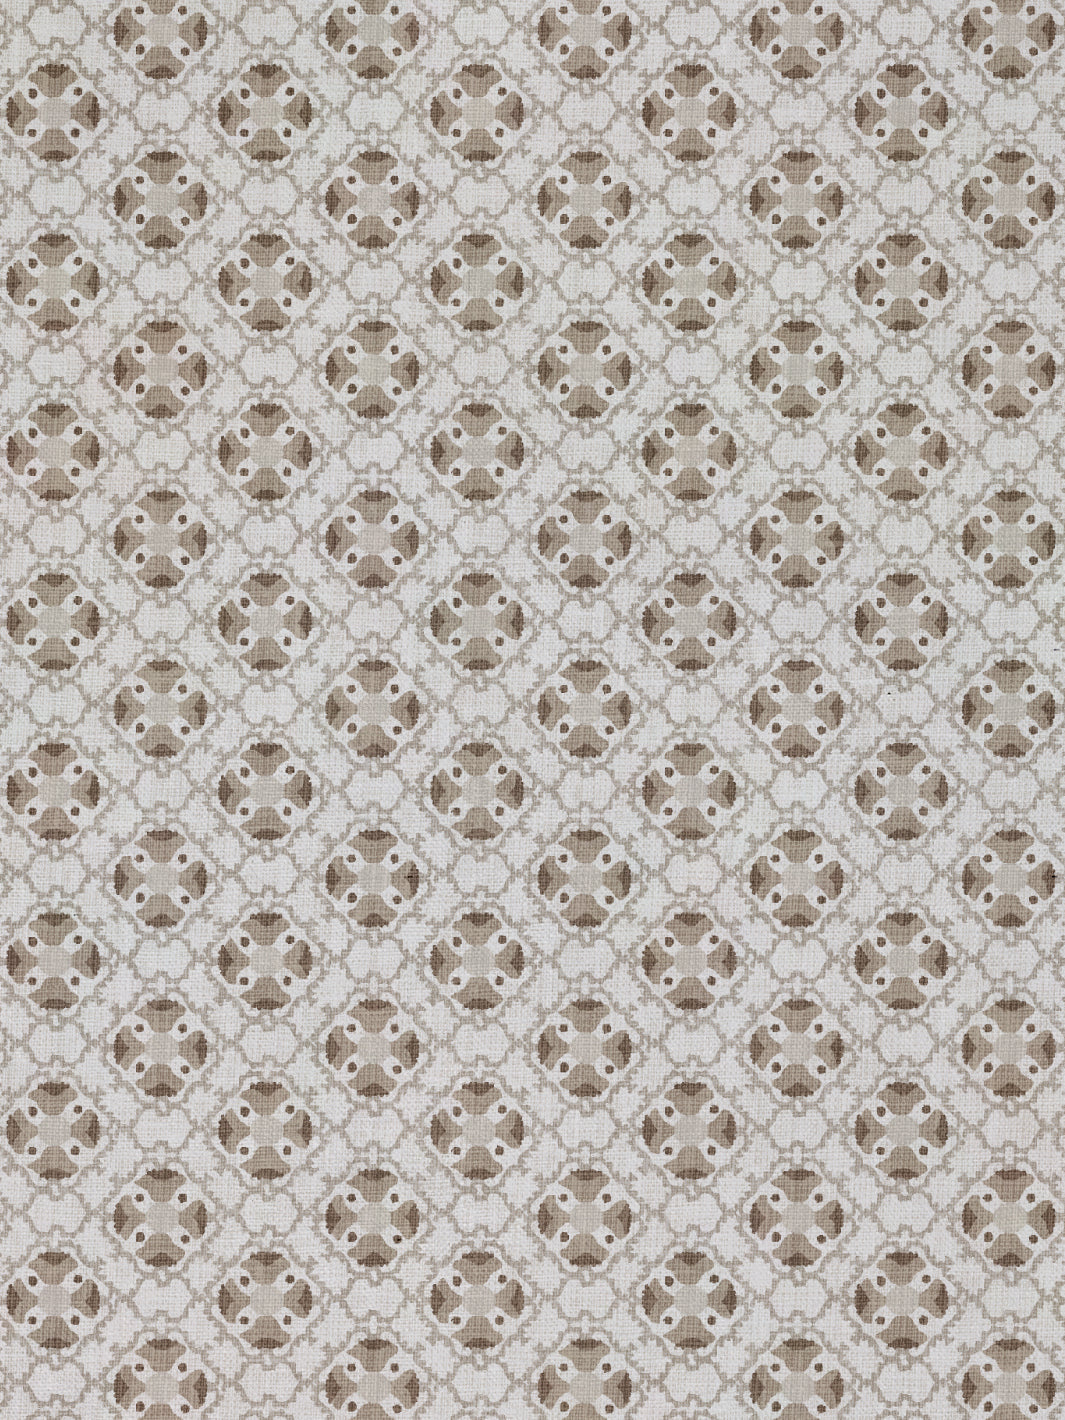 'Medallion All Over' Linen Fabric by Nathan Turner - Neutral